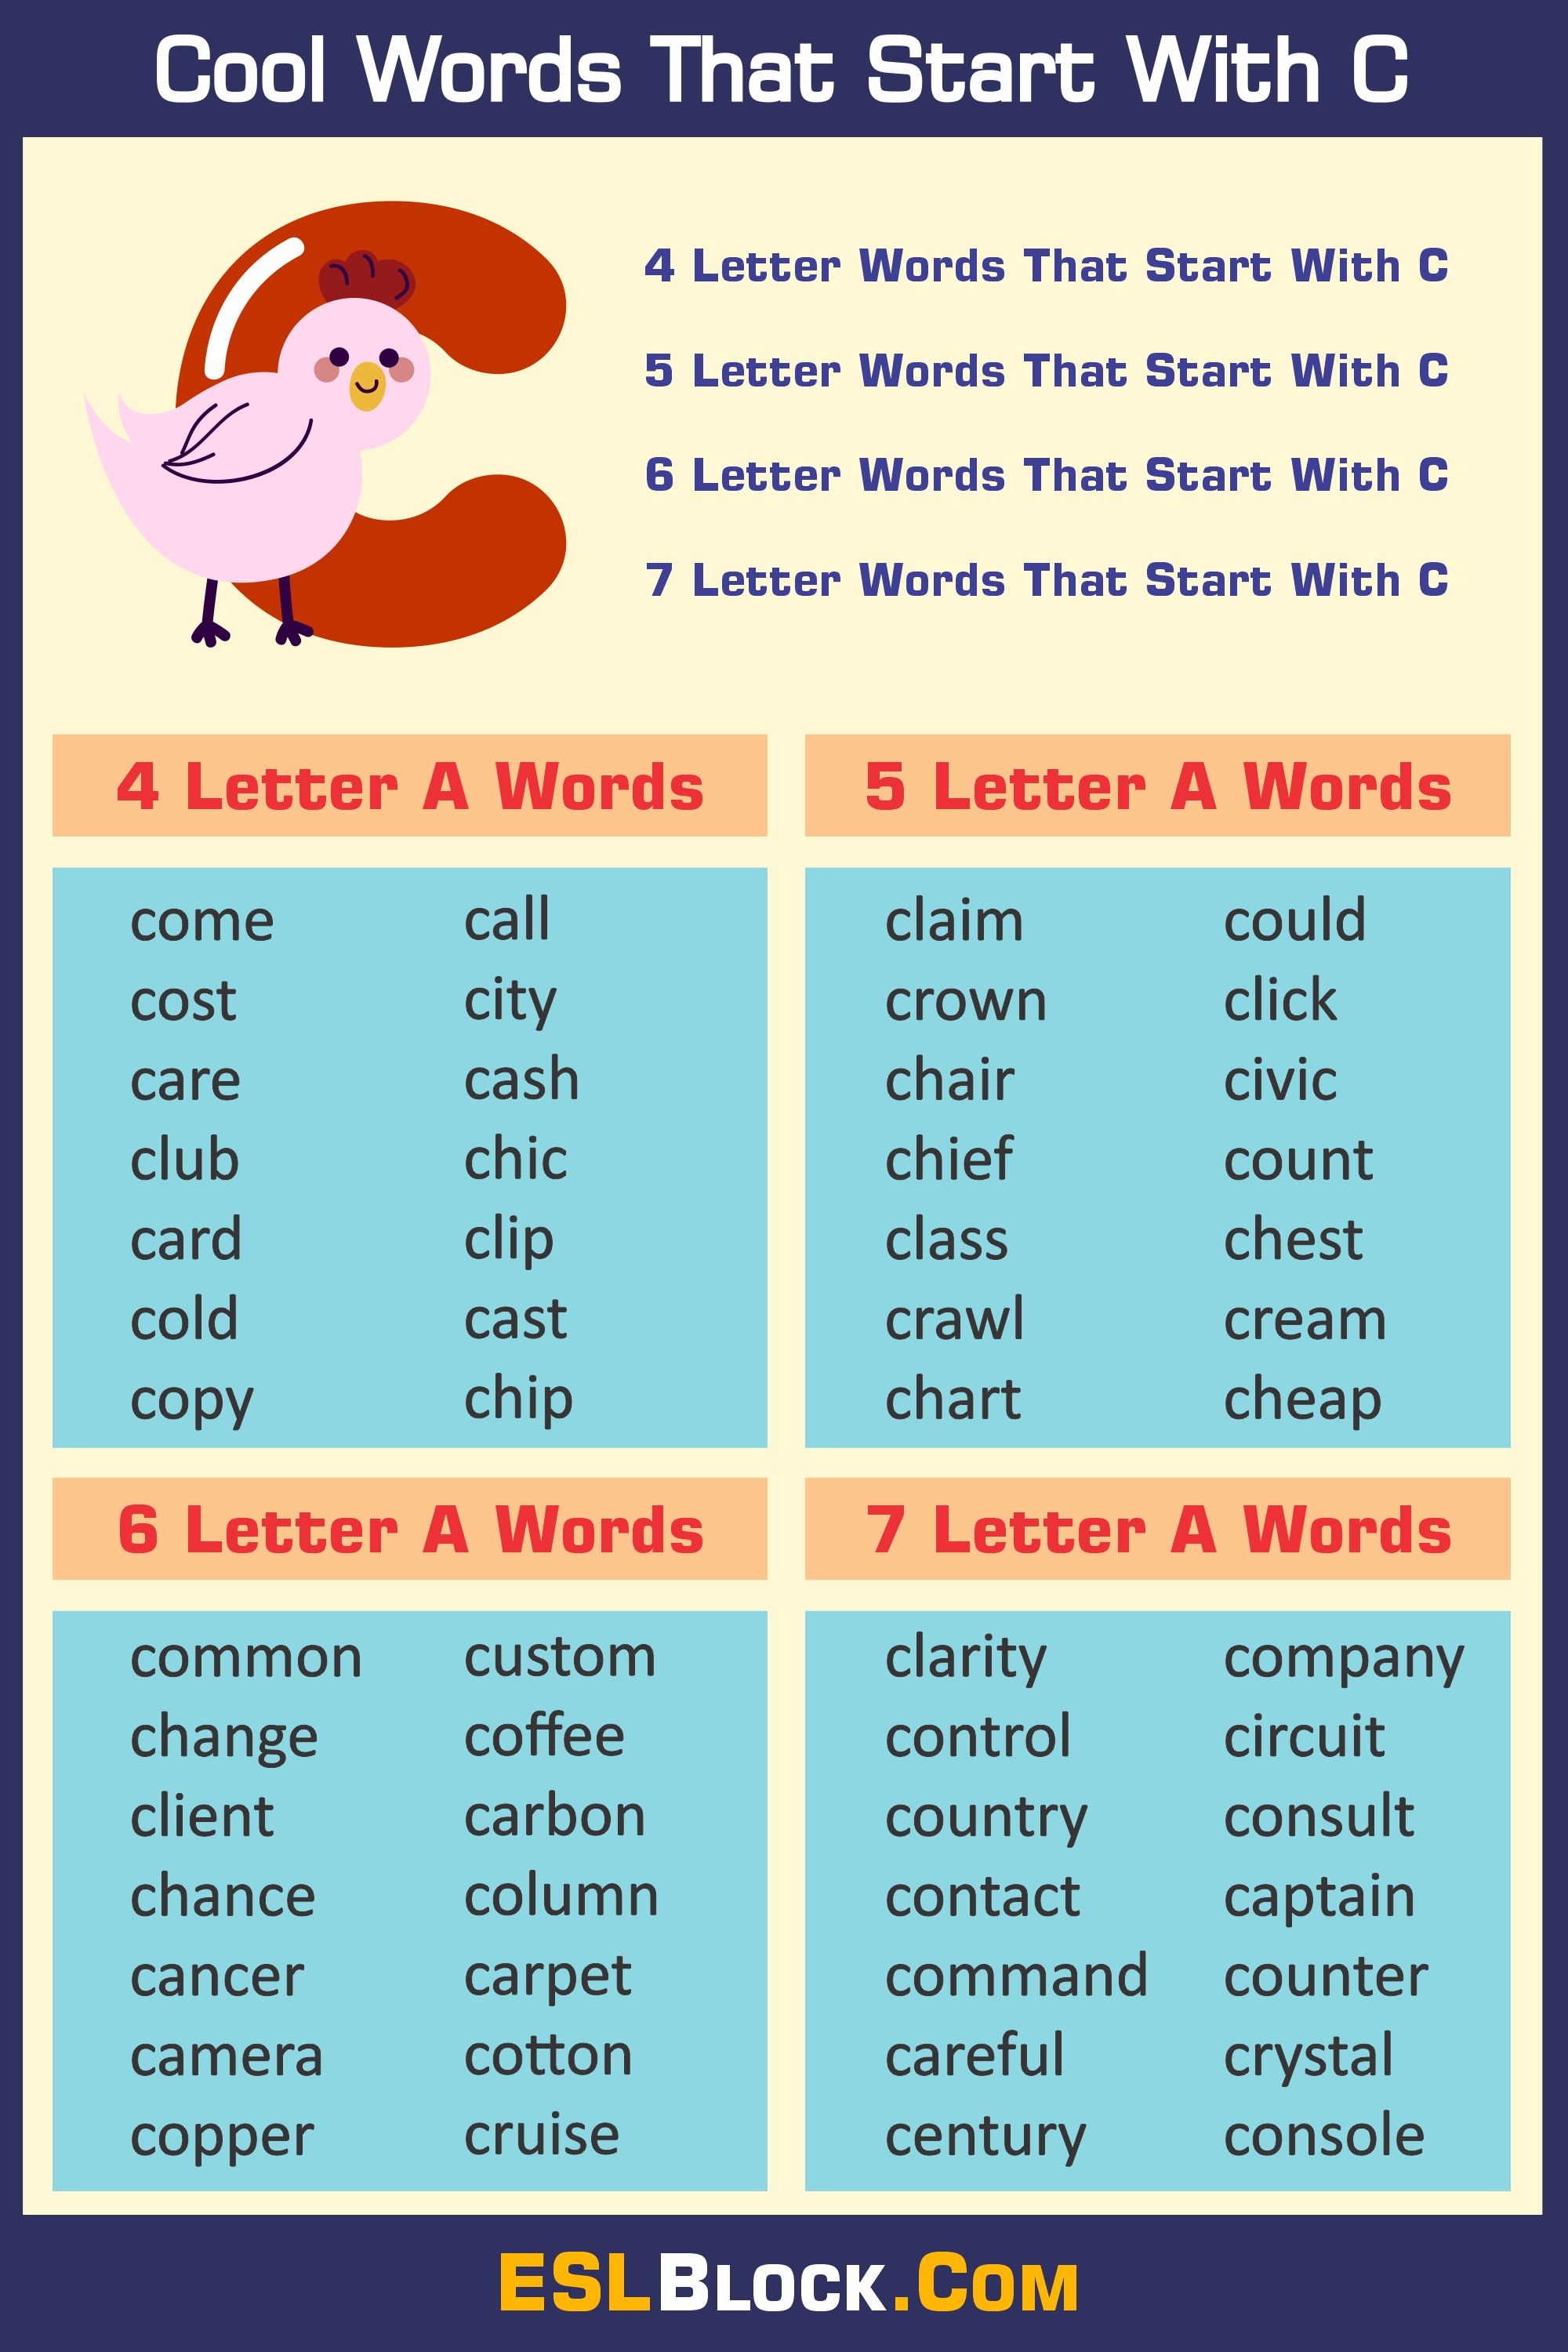 4 Letter Words, 4 Letter Words That Start With C, 5 Letter Words, 5 Letter Words That Start With C, 6 Letter Words, 6 Letter Words That Start With C, 7 Letter Words, 7 Letter Words That Start With C, Awesome Cool Words, C Words, Christmas Words That Start With C, Cool Words, Describing Words That Start With C, Descriptive Words That Start With C, English Words, Five Letter Words Starting with C, Good Words That Start With C, Nice Words That Start With C, Positive Words That Start With C, Unique Words, Word Dictionary, Words That Start With C, Words That Start With C to Describe Someone